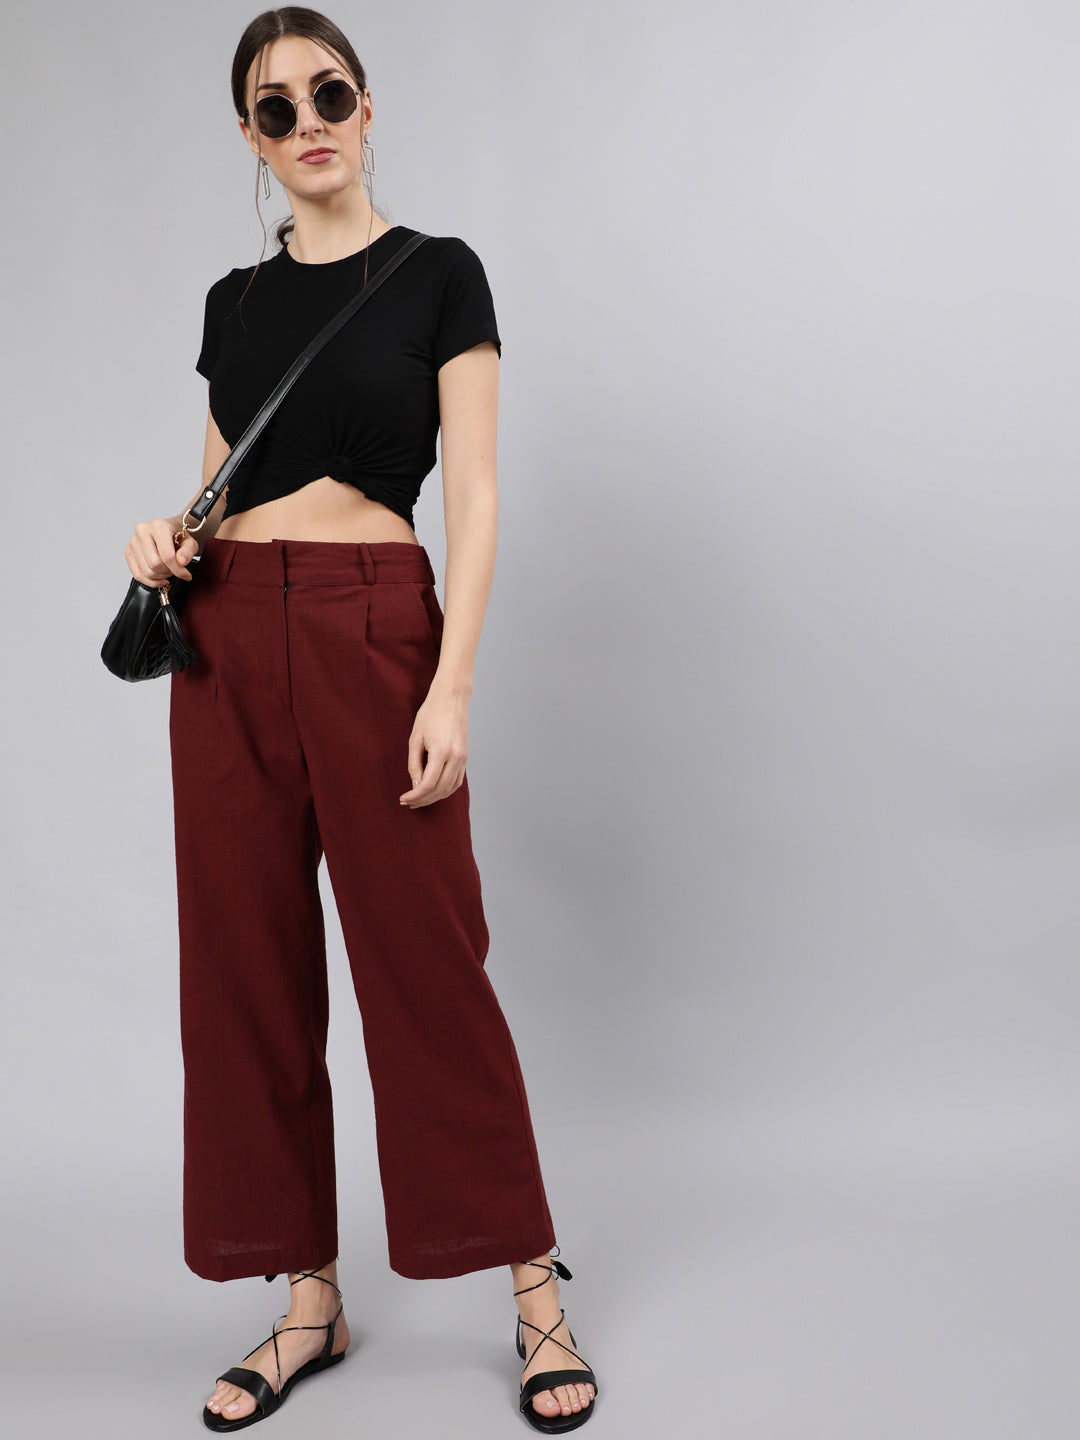 Give A Chic Spin To Your Style With These Straight Fit Pants For Women